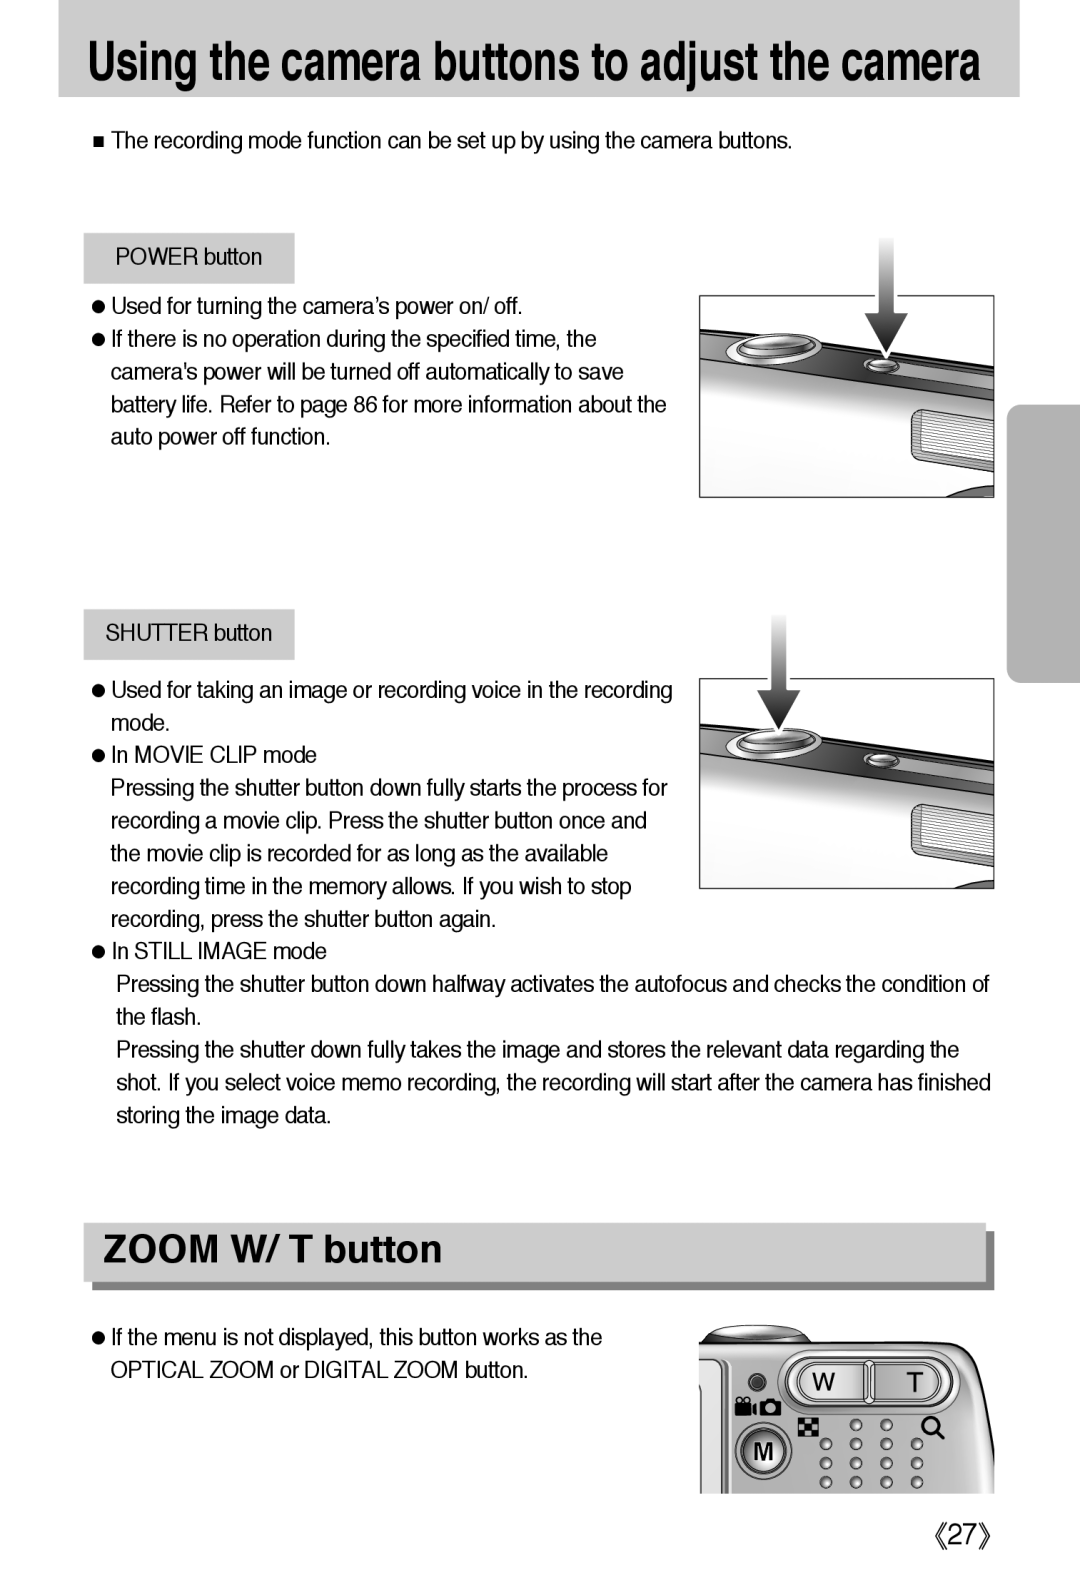 Samsung L50 user manual Using the camera buttons to adjust the camera, ZOOM W/ T button, 《27》 